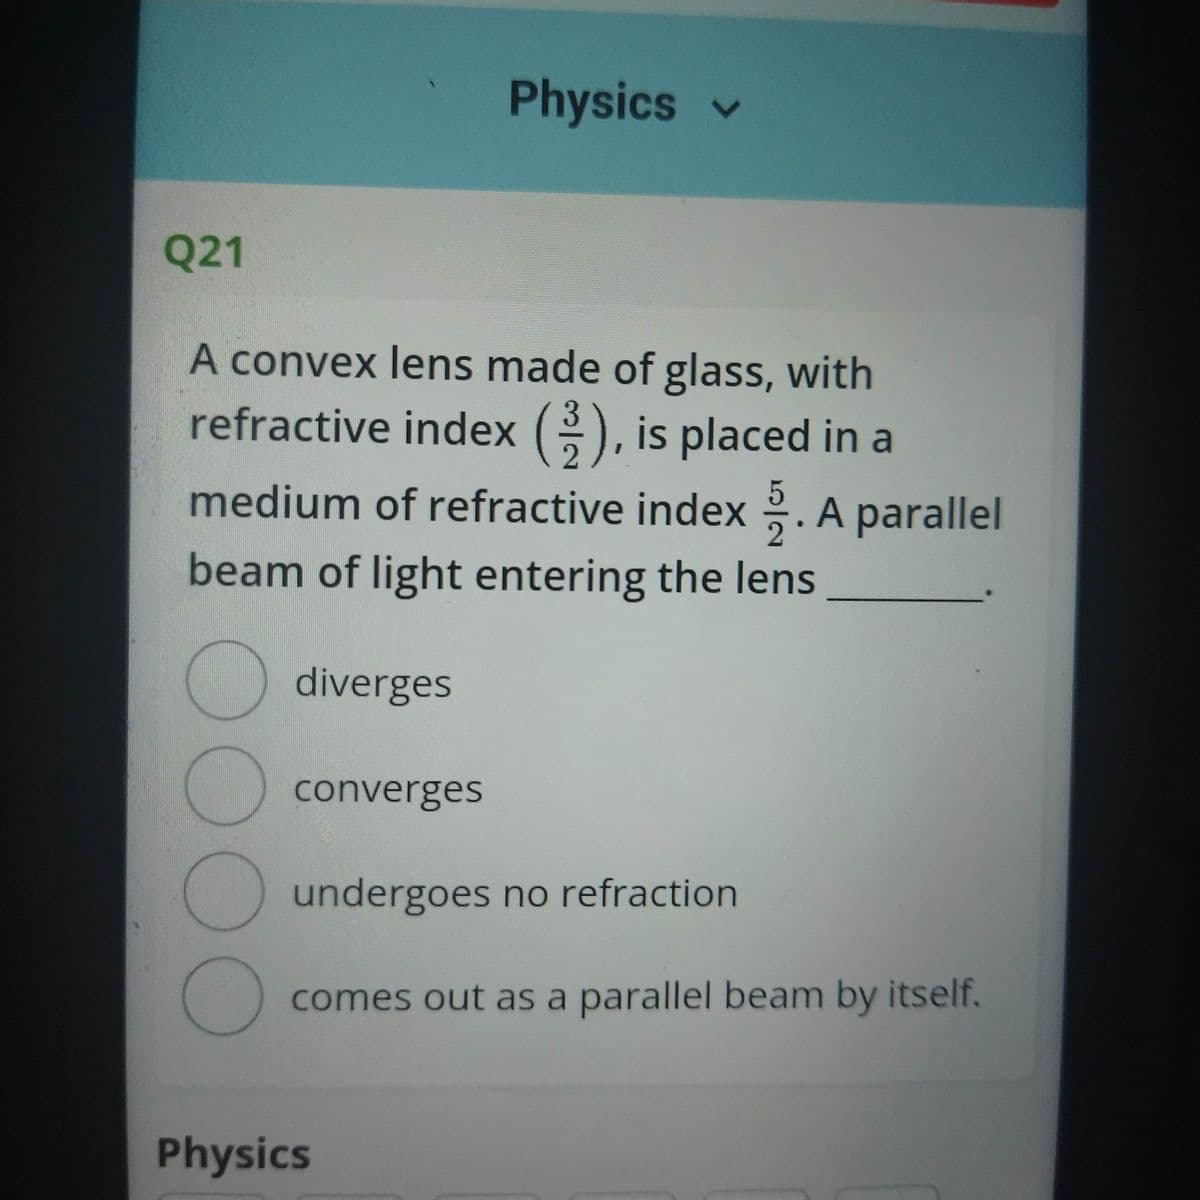 Physics v
Q21
A convex lens made of glass, with
refractive index (), is placed in a
medium of refractive index . A parallel
beam of light entering the lens
diverges
converges
undergoes no refraction
comes out as a parallel beam by itself.
Physics
